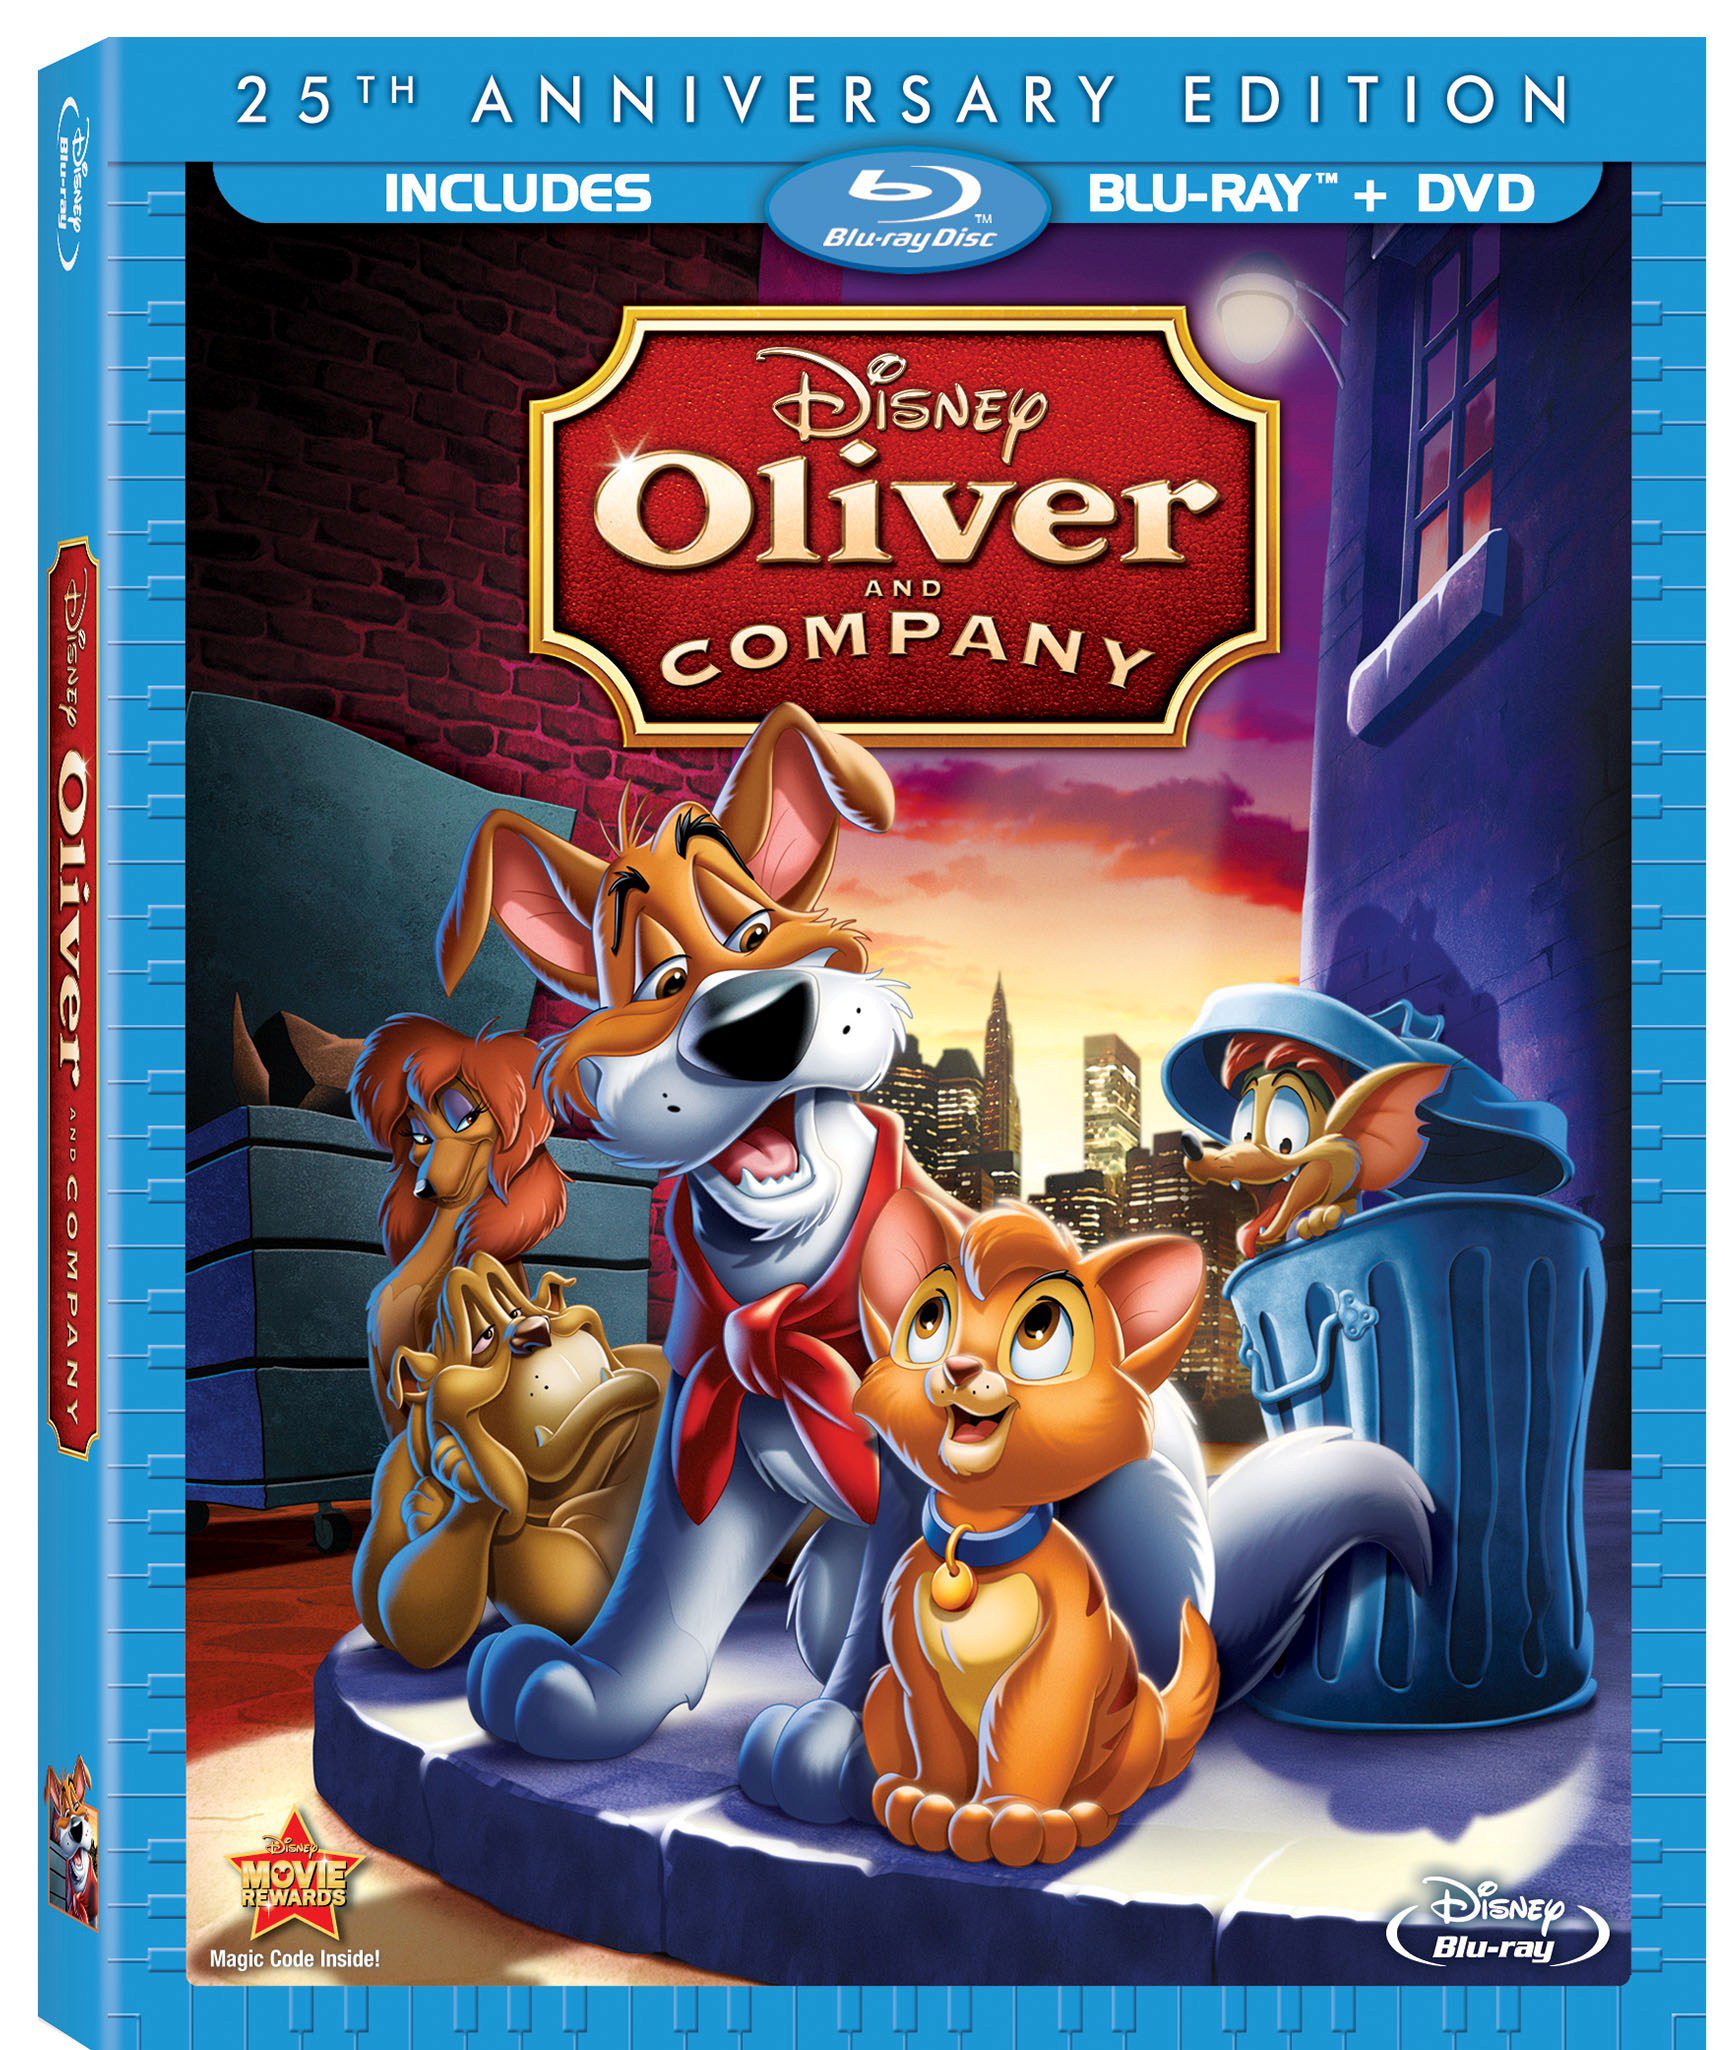 Oliver And Company 25th Anniversary on Blu-ray + DVD